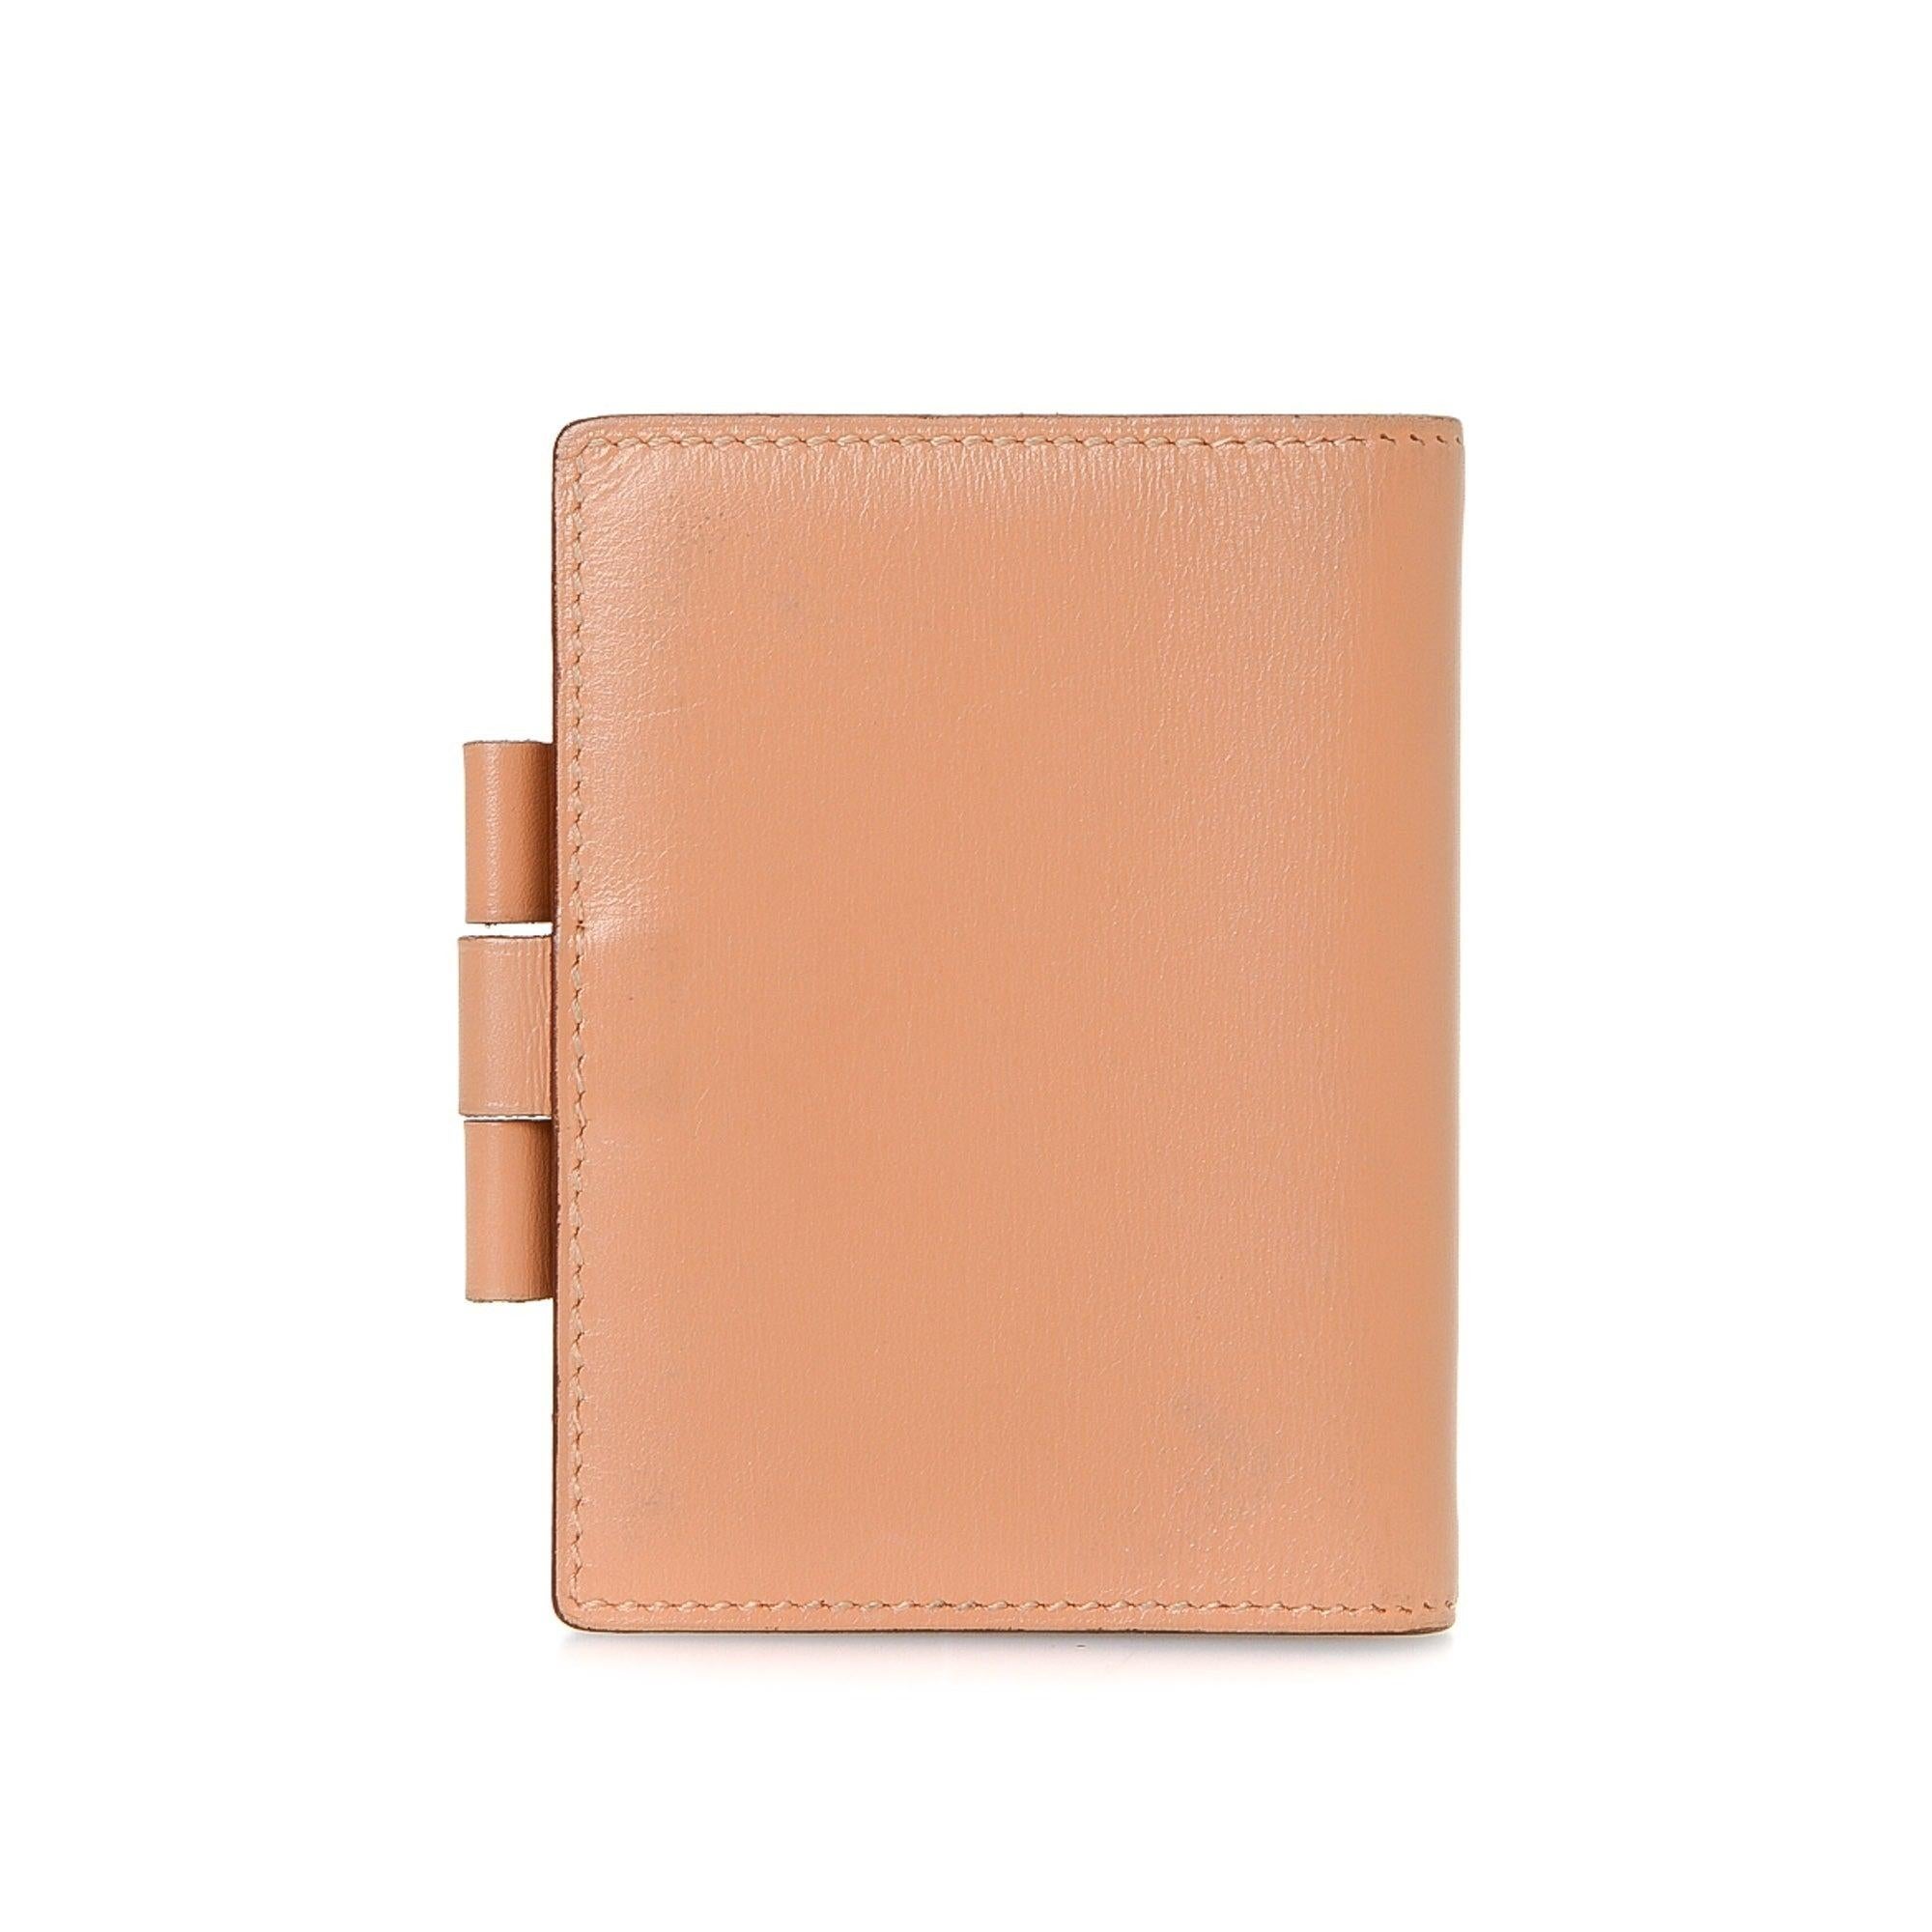 Hermes Peach Leather Mini Agenda Wallet with silver-tone hardware, leather trim, dual interior pockets, lD closure and brand stamp at interior edge.
29341MSC